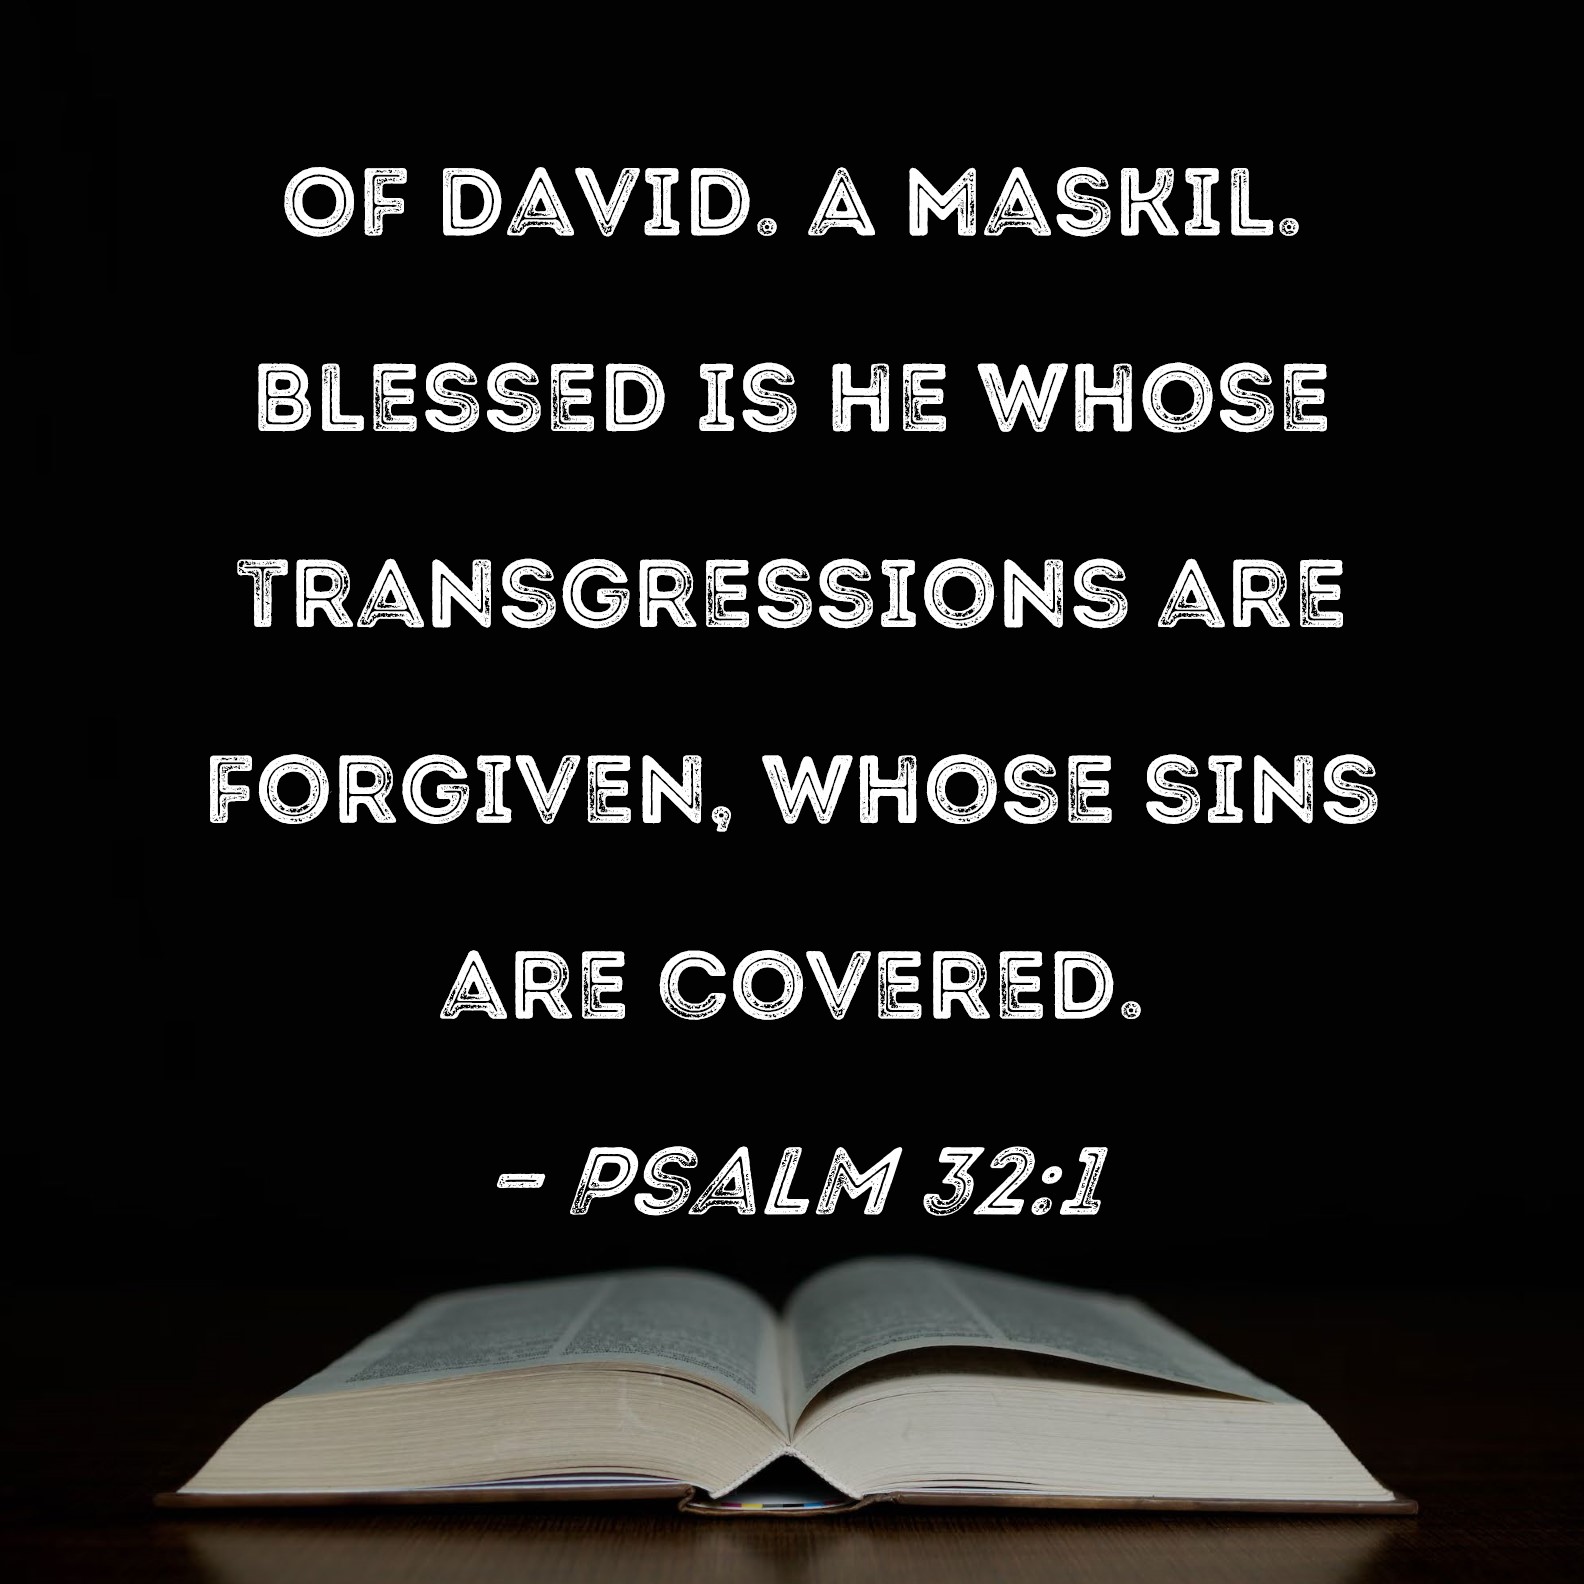 Psalm Blessed Is He Whose Transgressions Are Forgiven Whose Sins Are Covered